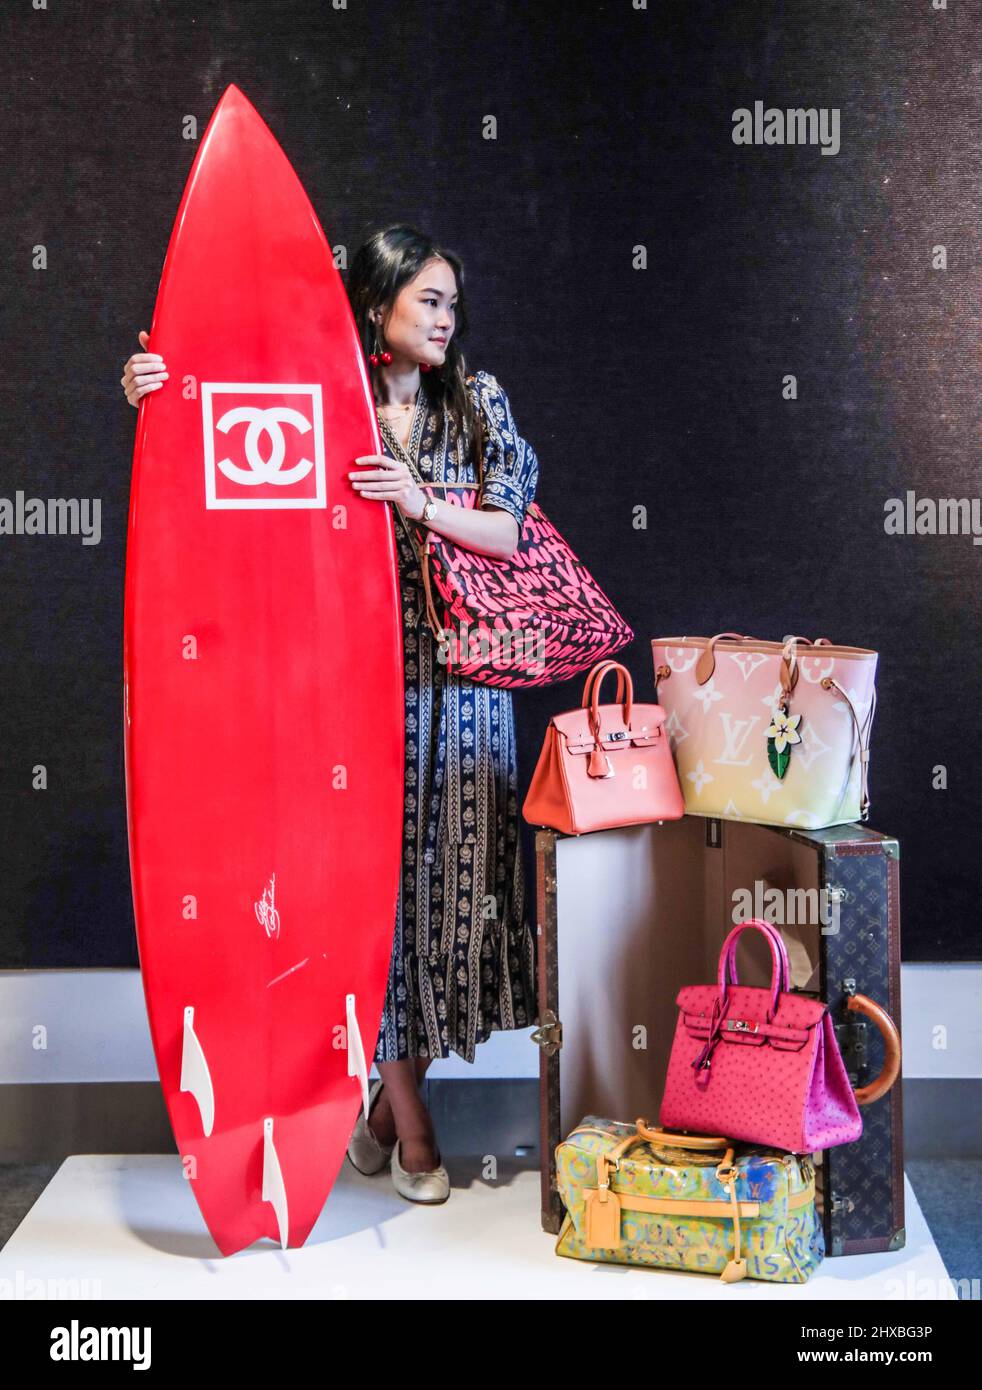 London UK 11 March 2020 A red carbon fibre Chanel Surfboard with three  keels– Chanel only made surfboards in limited numbers, and so it is really  rare to have one come up